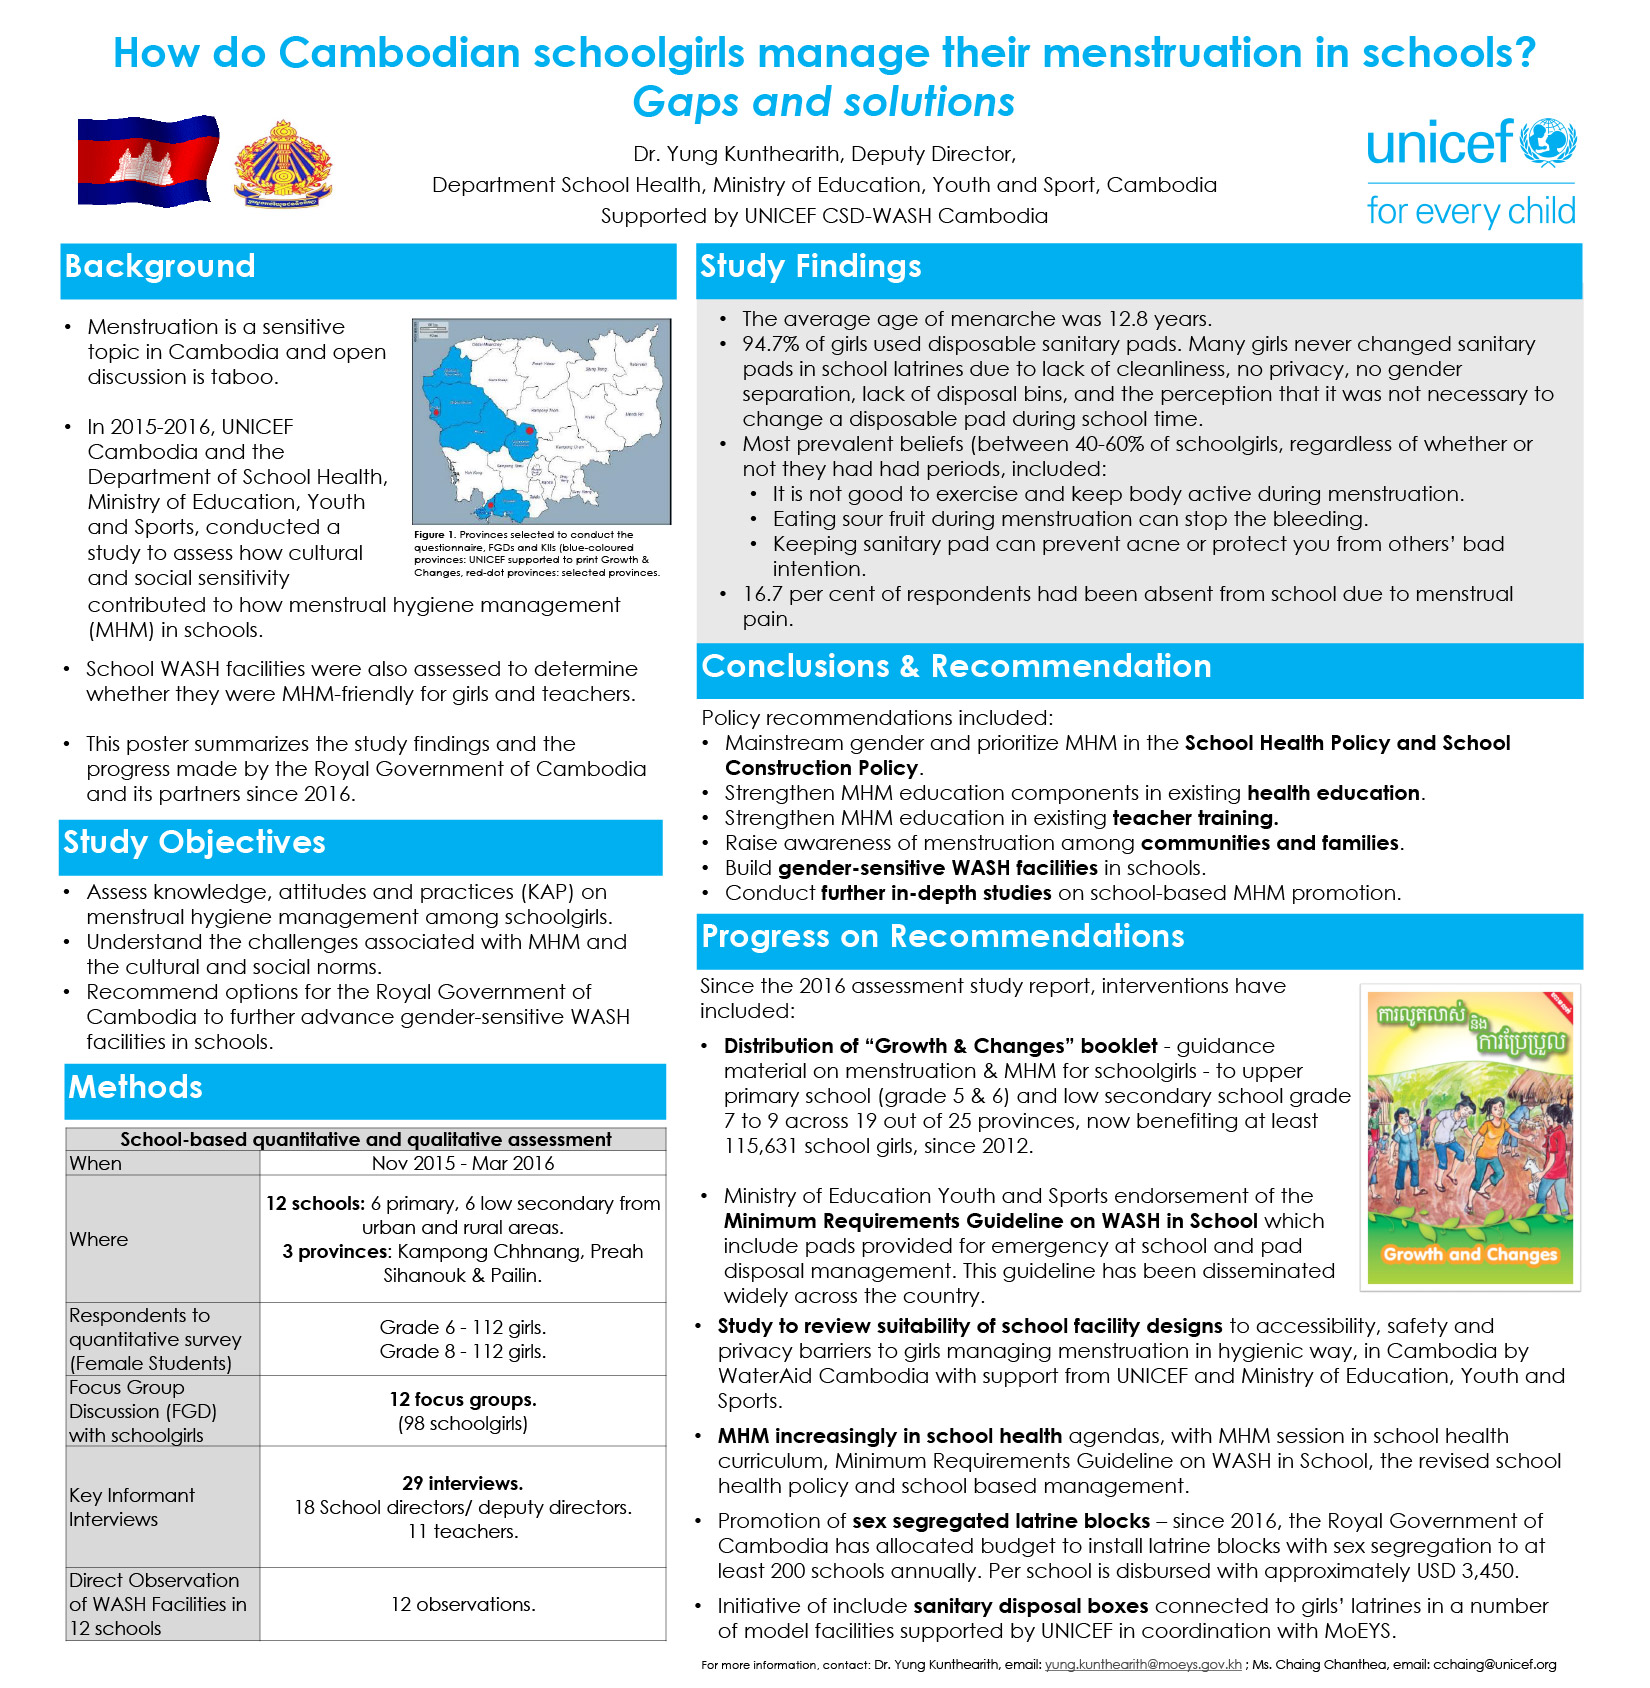 How do Cambodian schoolgirls manage their menstruation in schools - Gaps and solution.